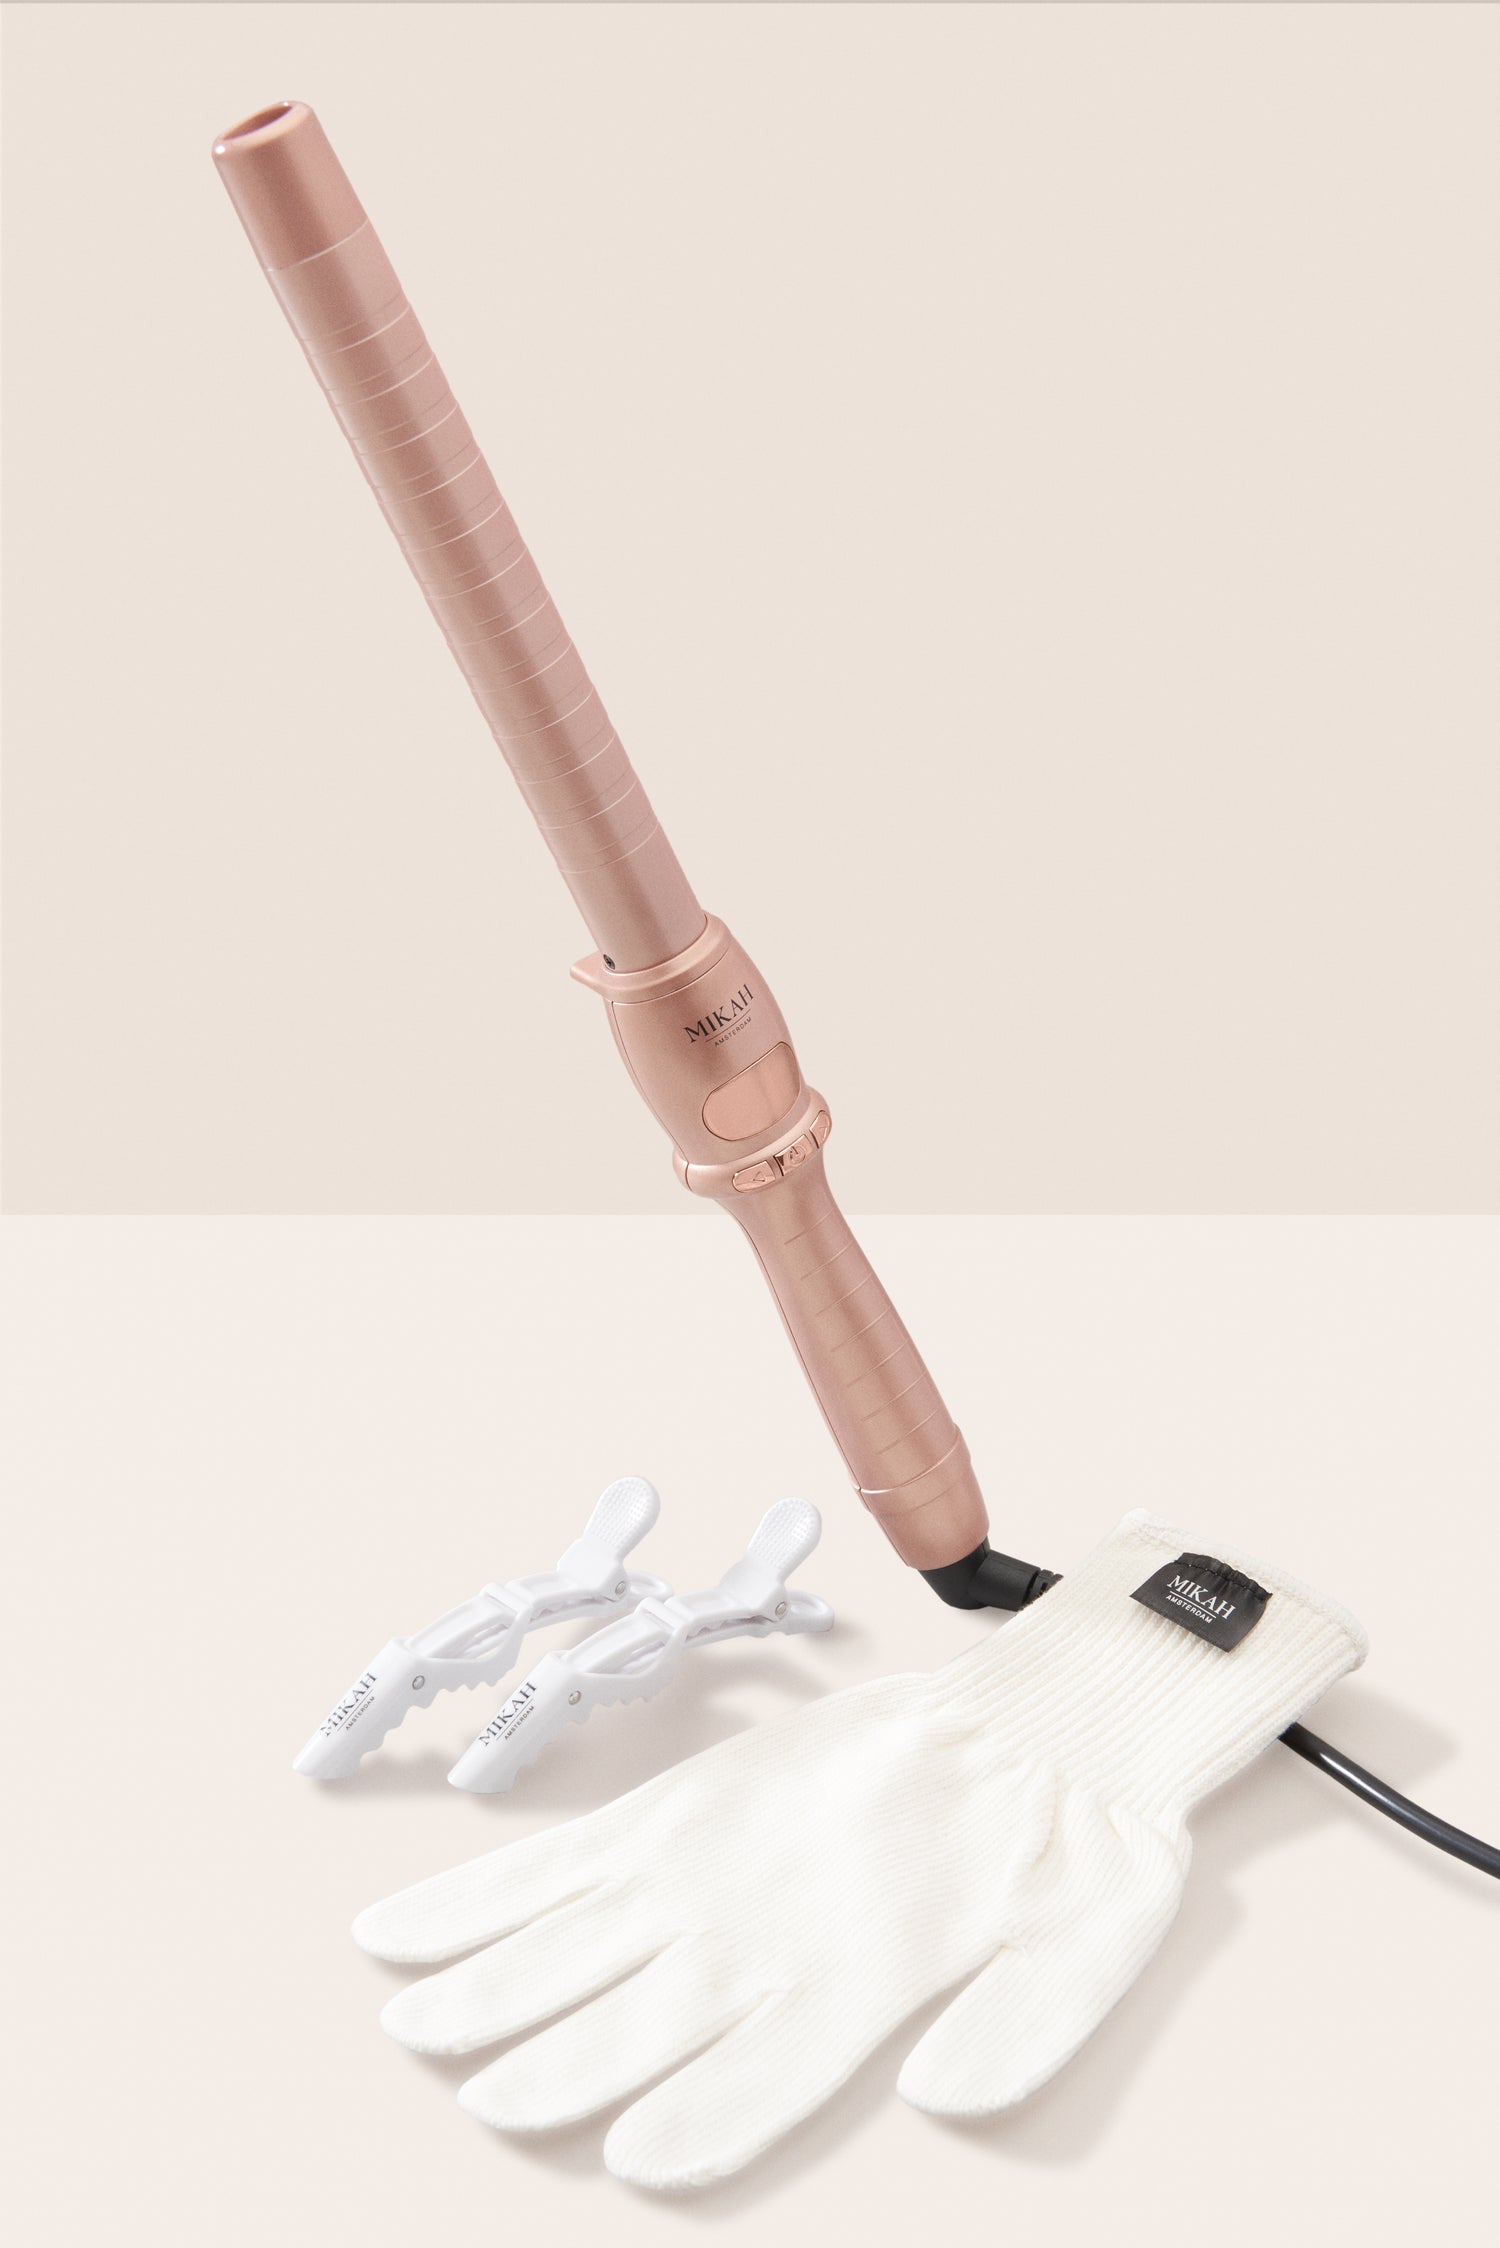 MIKAH - Professional Curling Iron 25 mm